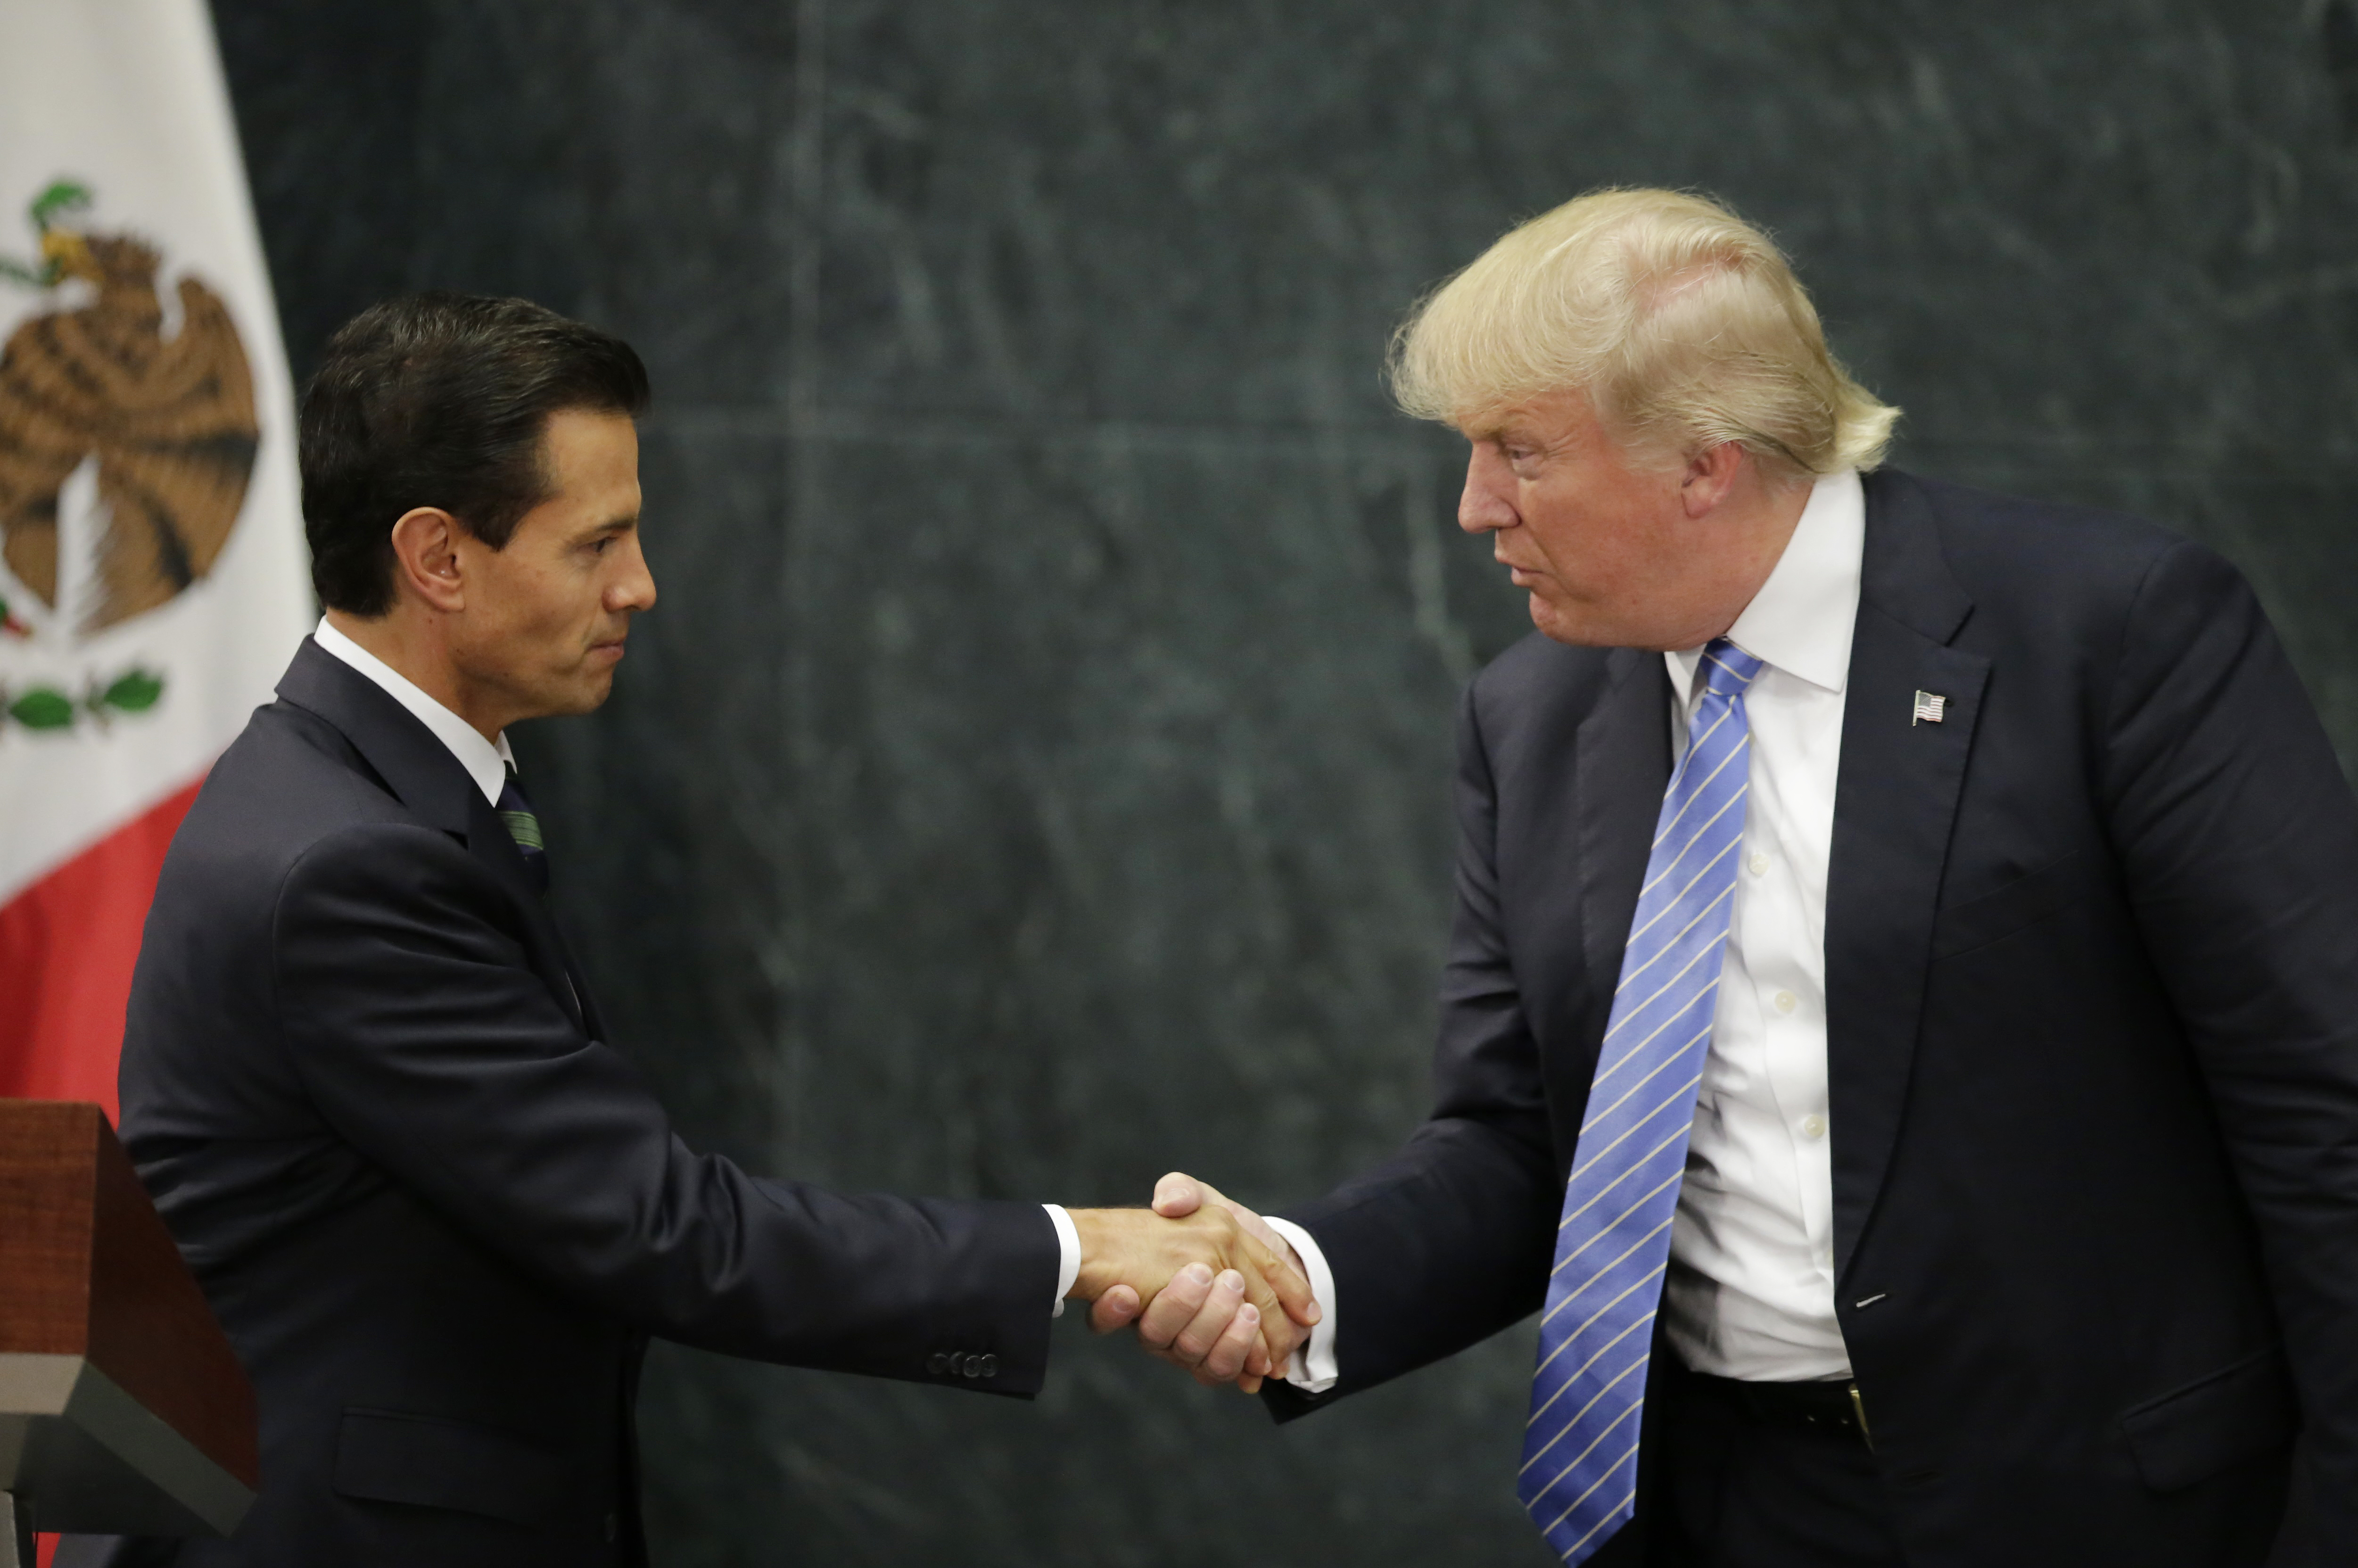 U.S. Republican presidential nominee Donald Trump and Mexico's President Enrique Pena Nieto shake hands at a press conference at the Los Pinos residence in Mexico City, Mexico, August 31, 2016. REUTERS/Henry Romero TPX IMAGES OF THE DAY - RTX2NQRI